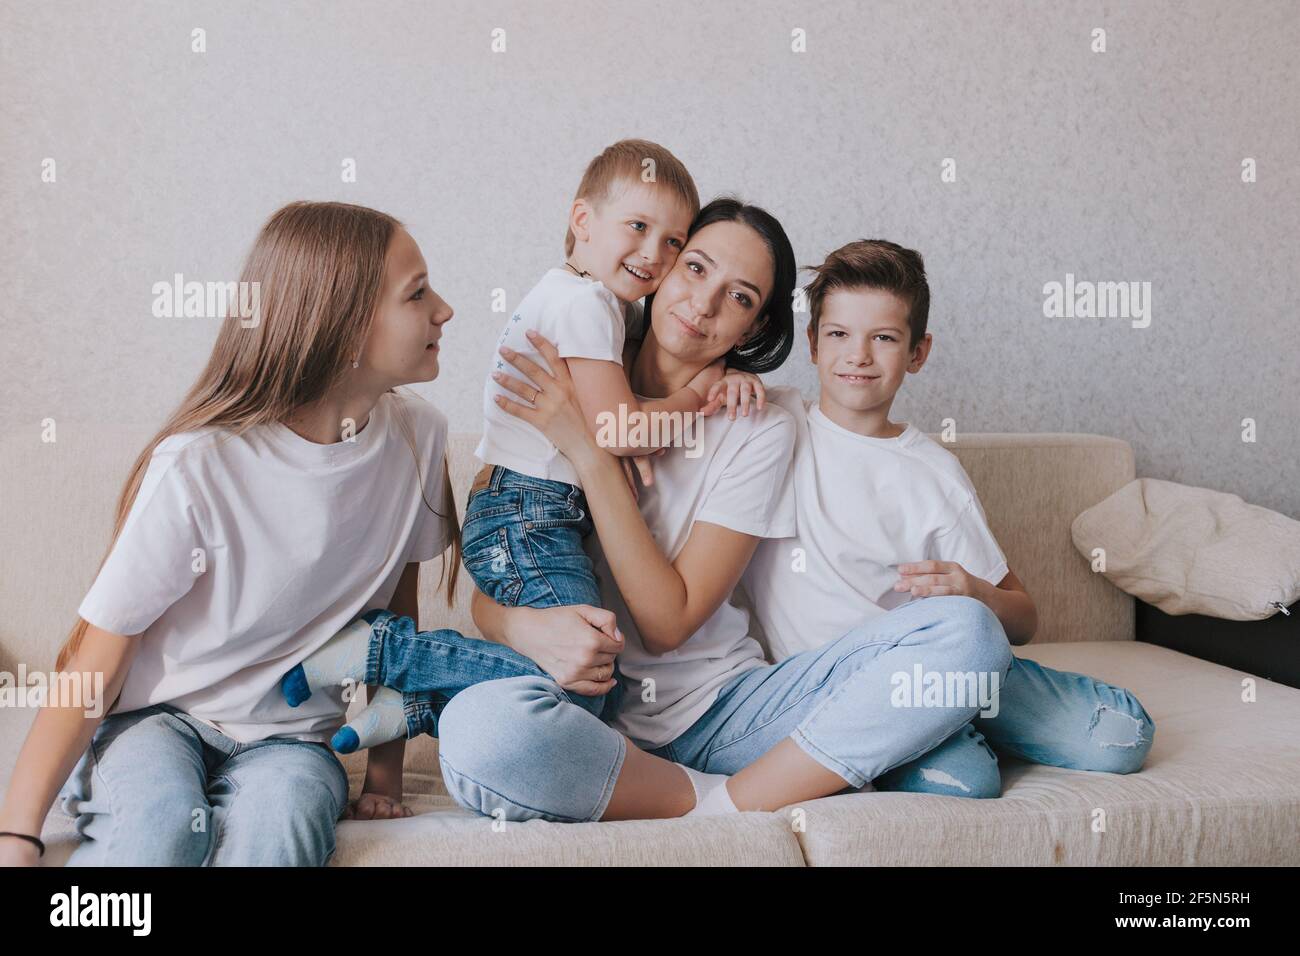 children in t-shirts and jeans isolated on white. Friends or brothers and  sisters Stock Photo - Alamy